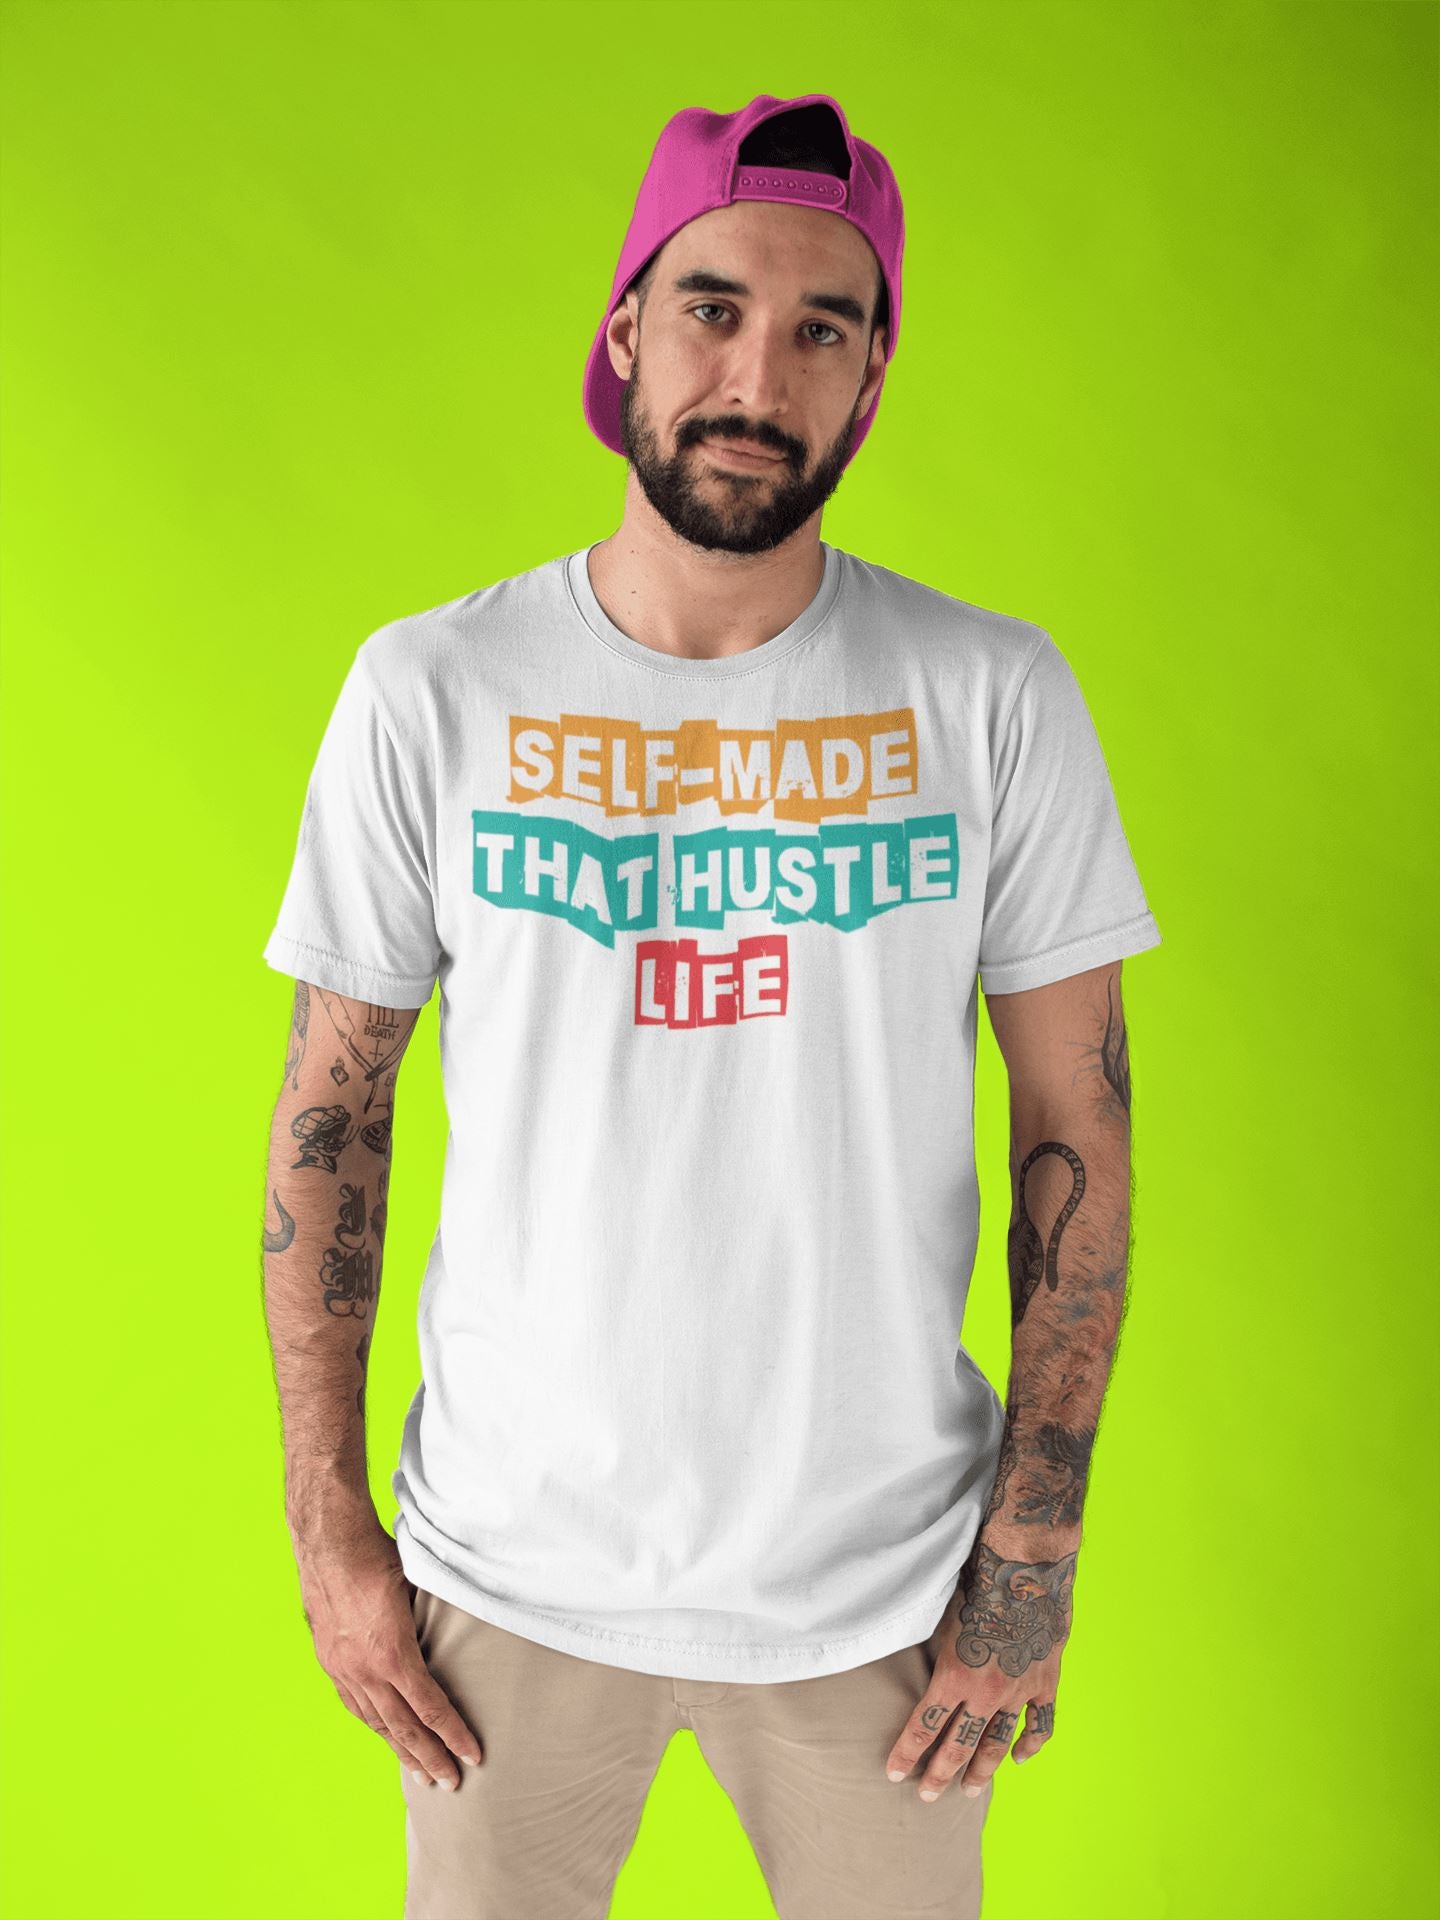 Self Made That Hustle Life Exclusive Supreme T Shirt for Men and Women - Catch My Drift India  activewear, black, clothing, made in india, motivation, shirt, stock, stock market, t shirt, tra